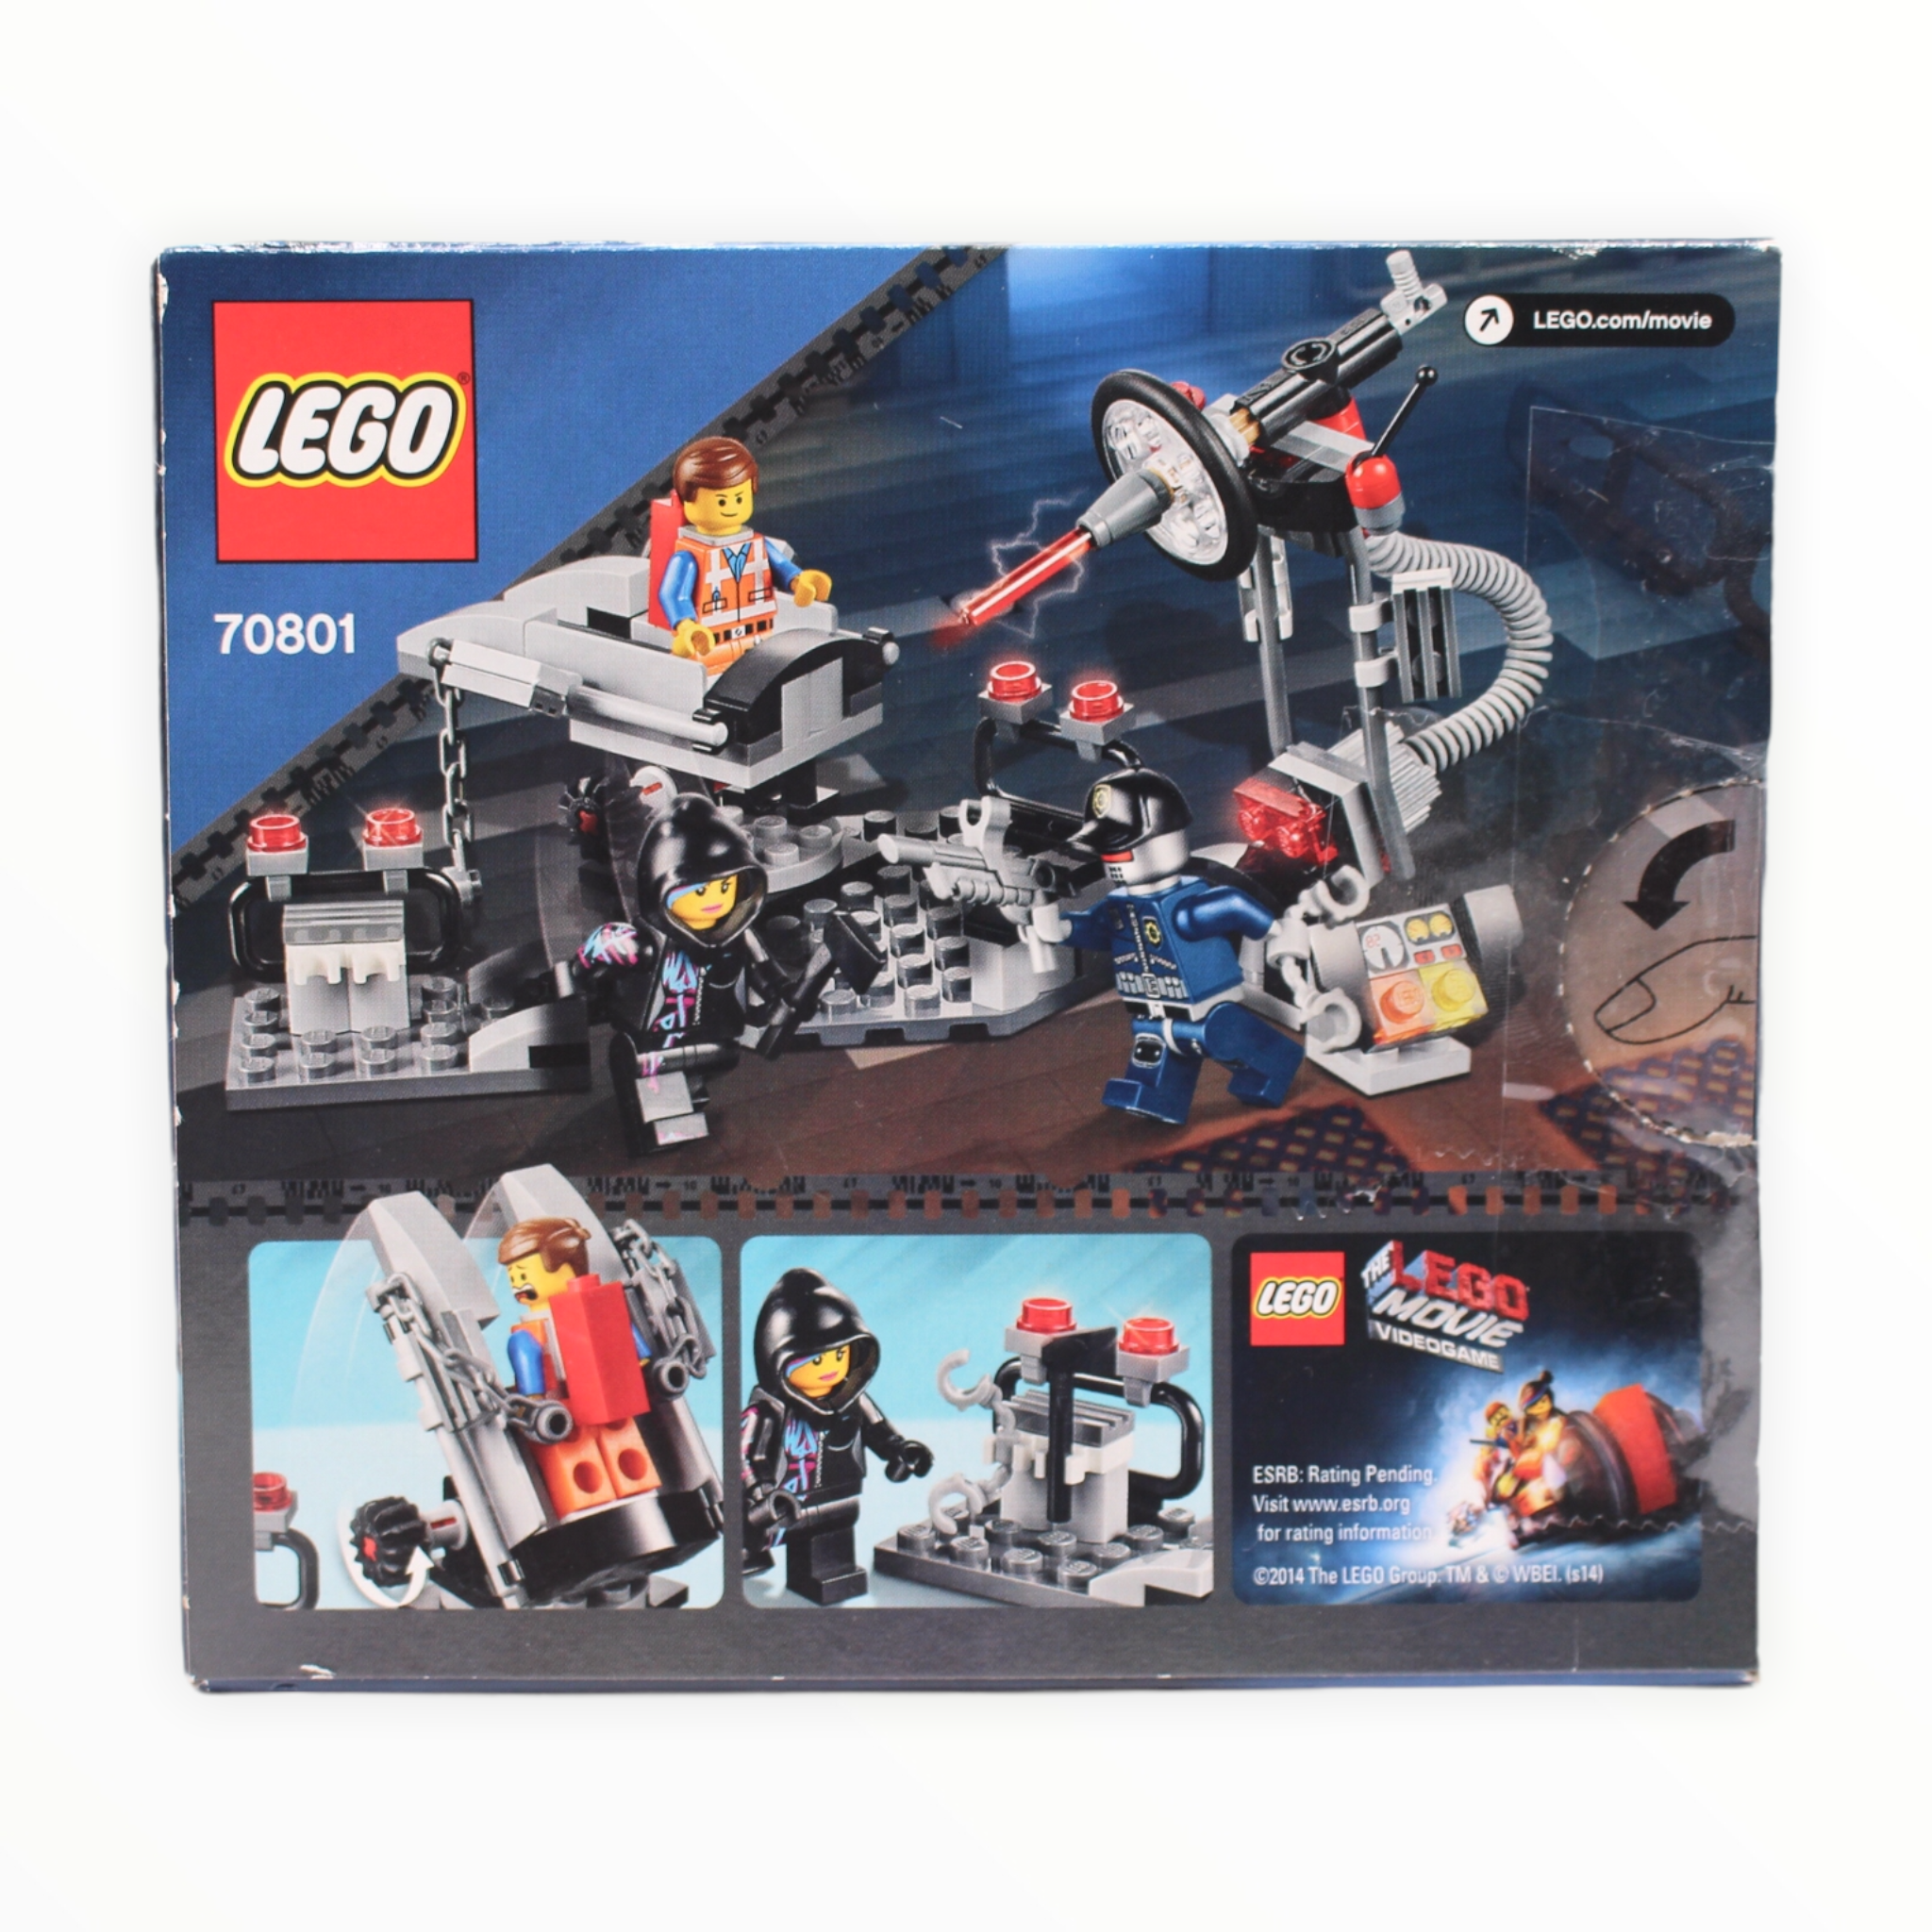 Certified Used Set 70801 The LEGO Movie Melting Room